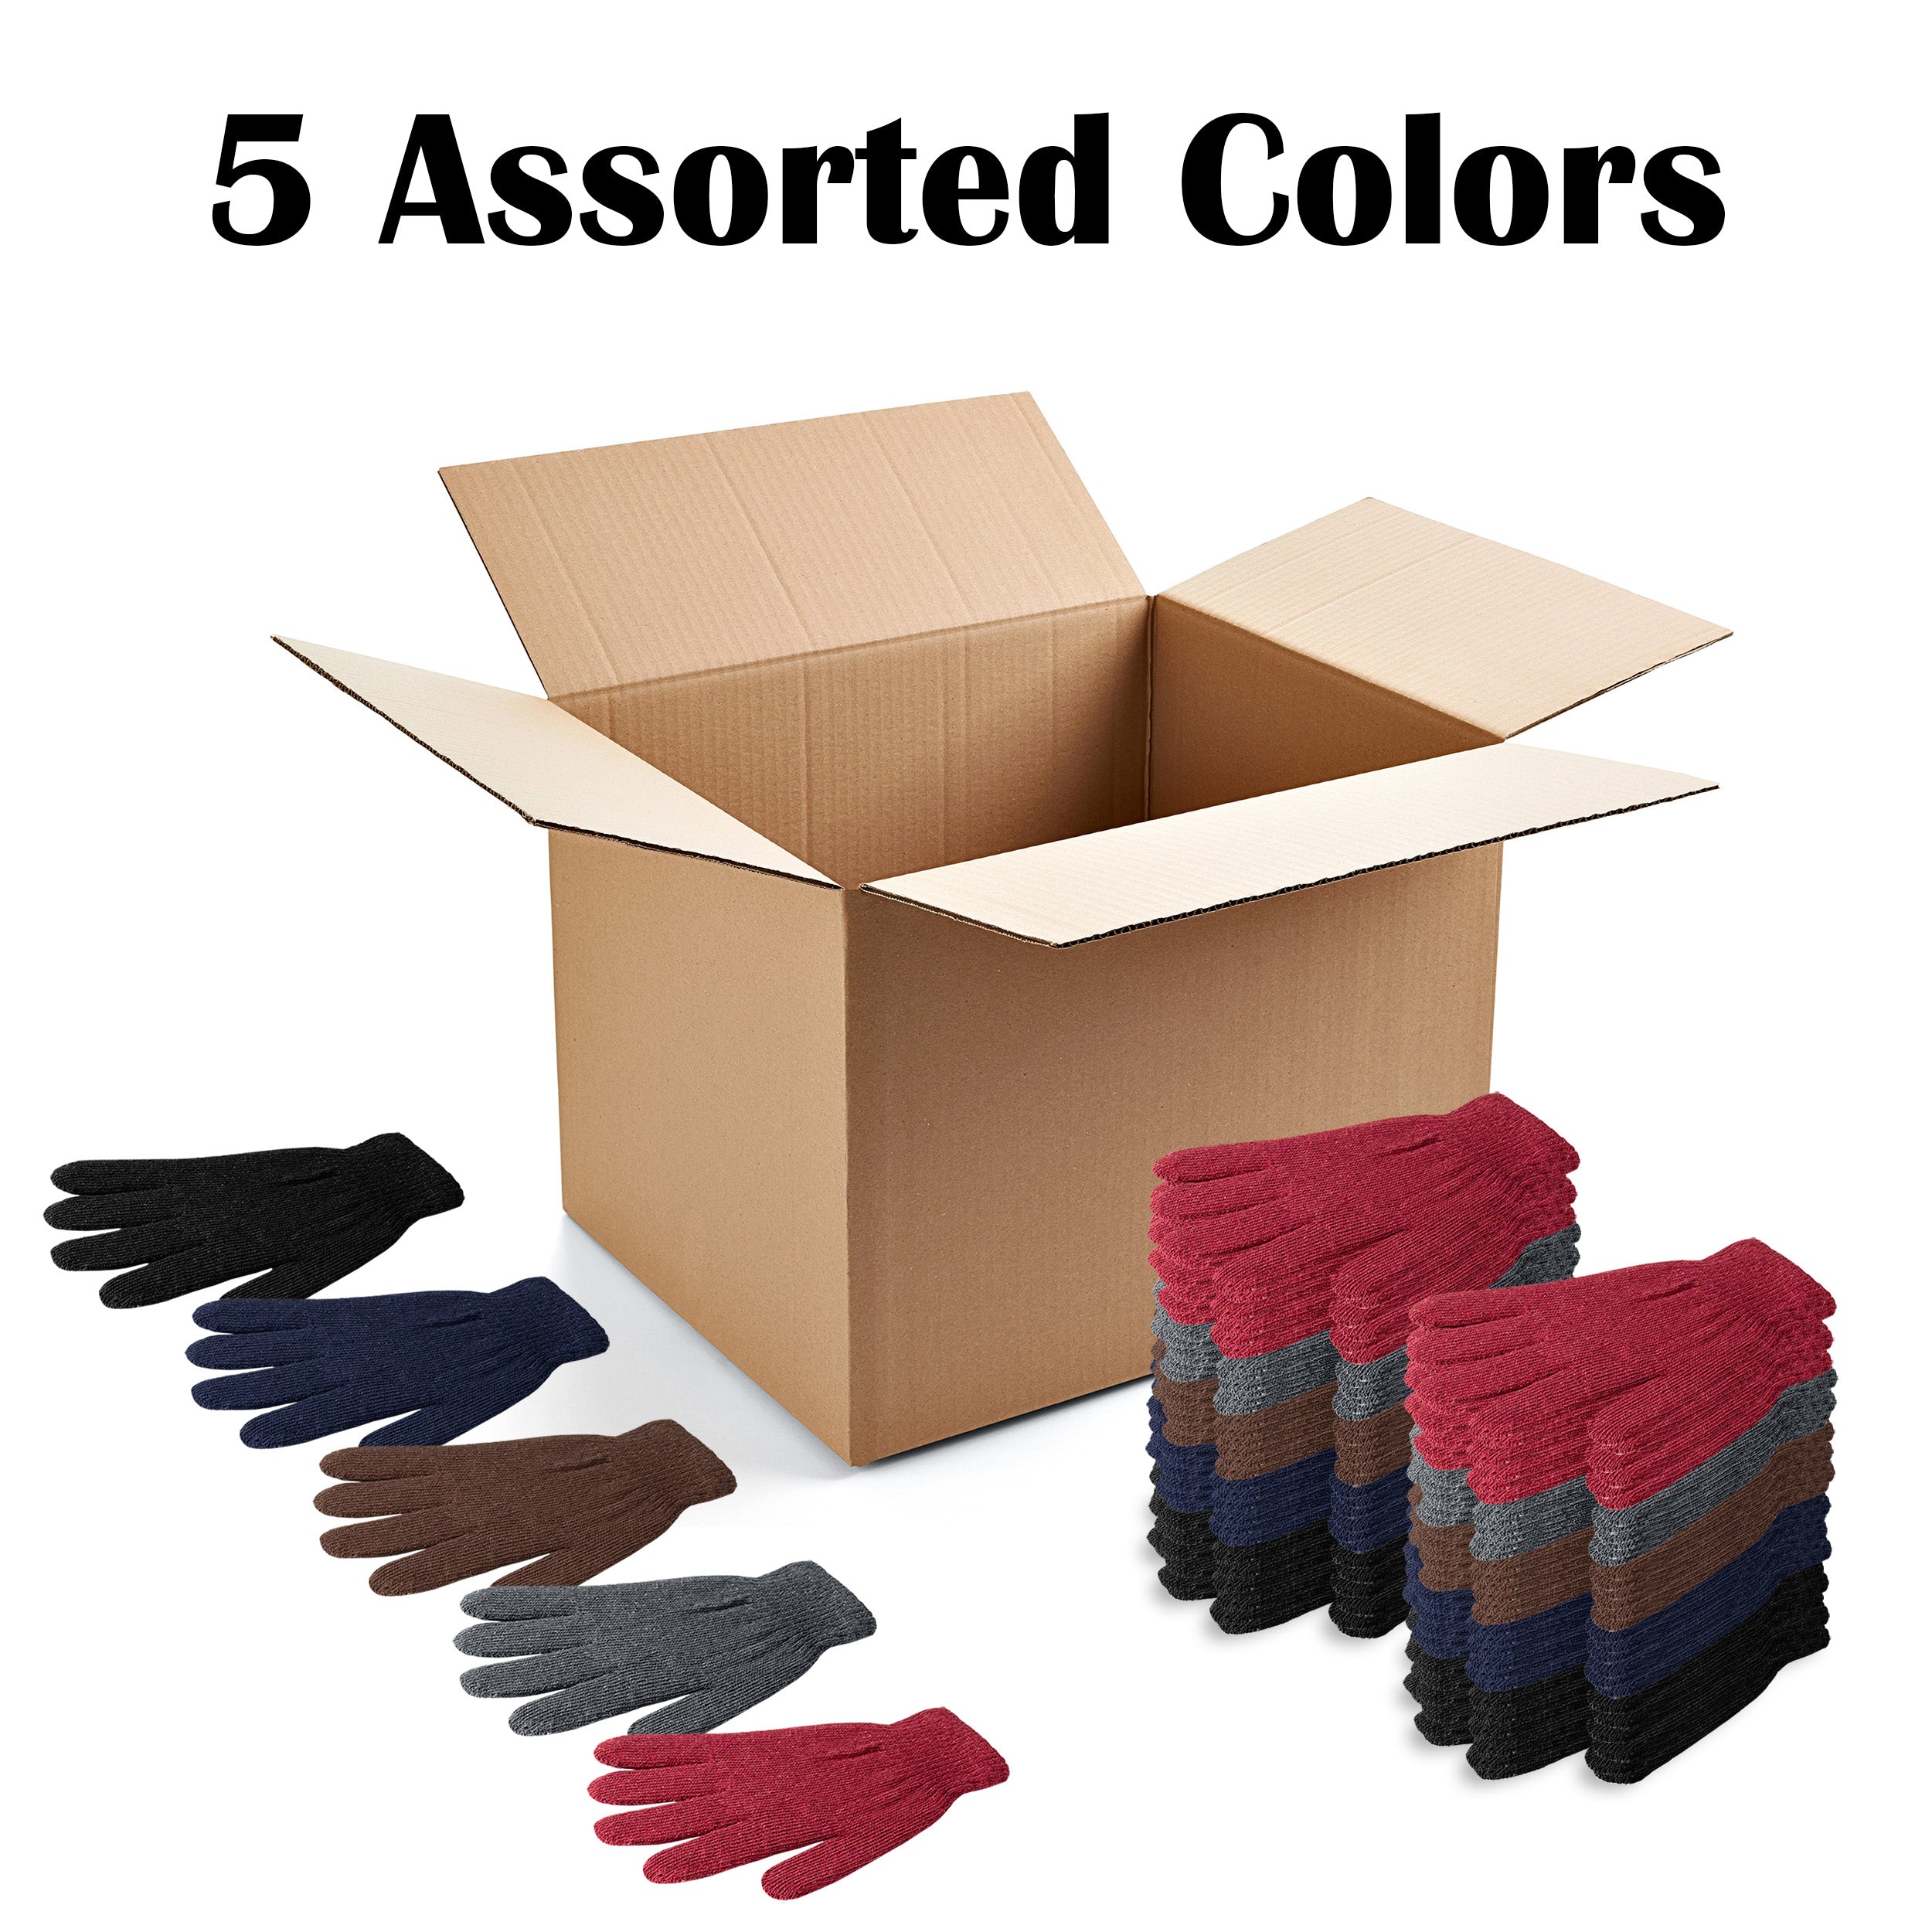 96 Pack - Wholesale Unisex Winter Gloves in 5 Assorted Colors